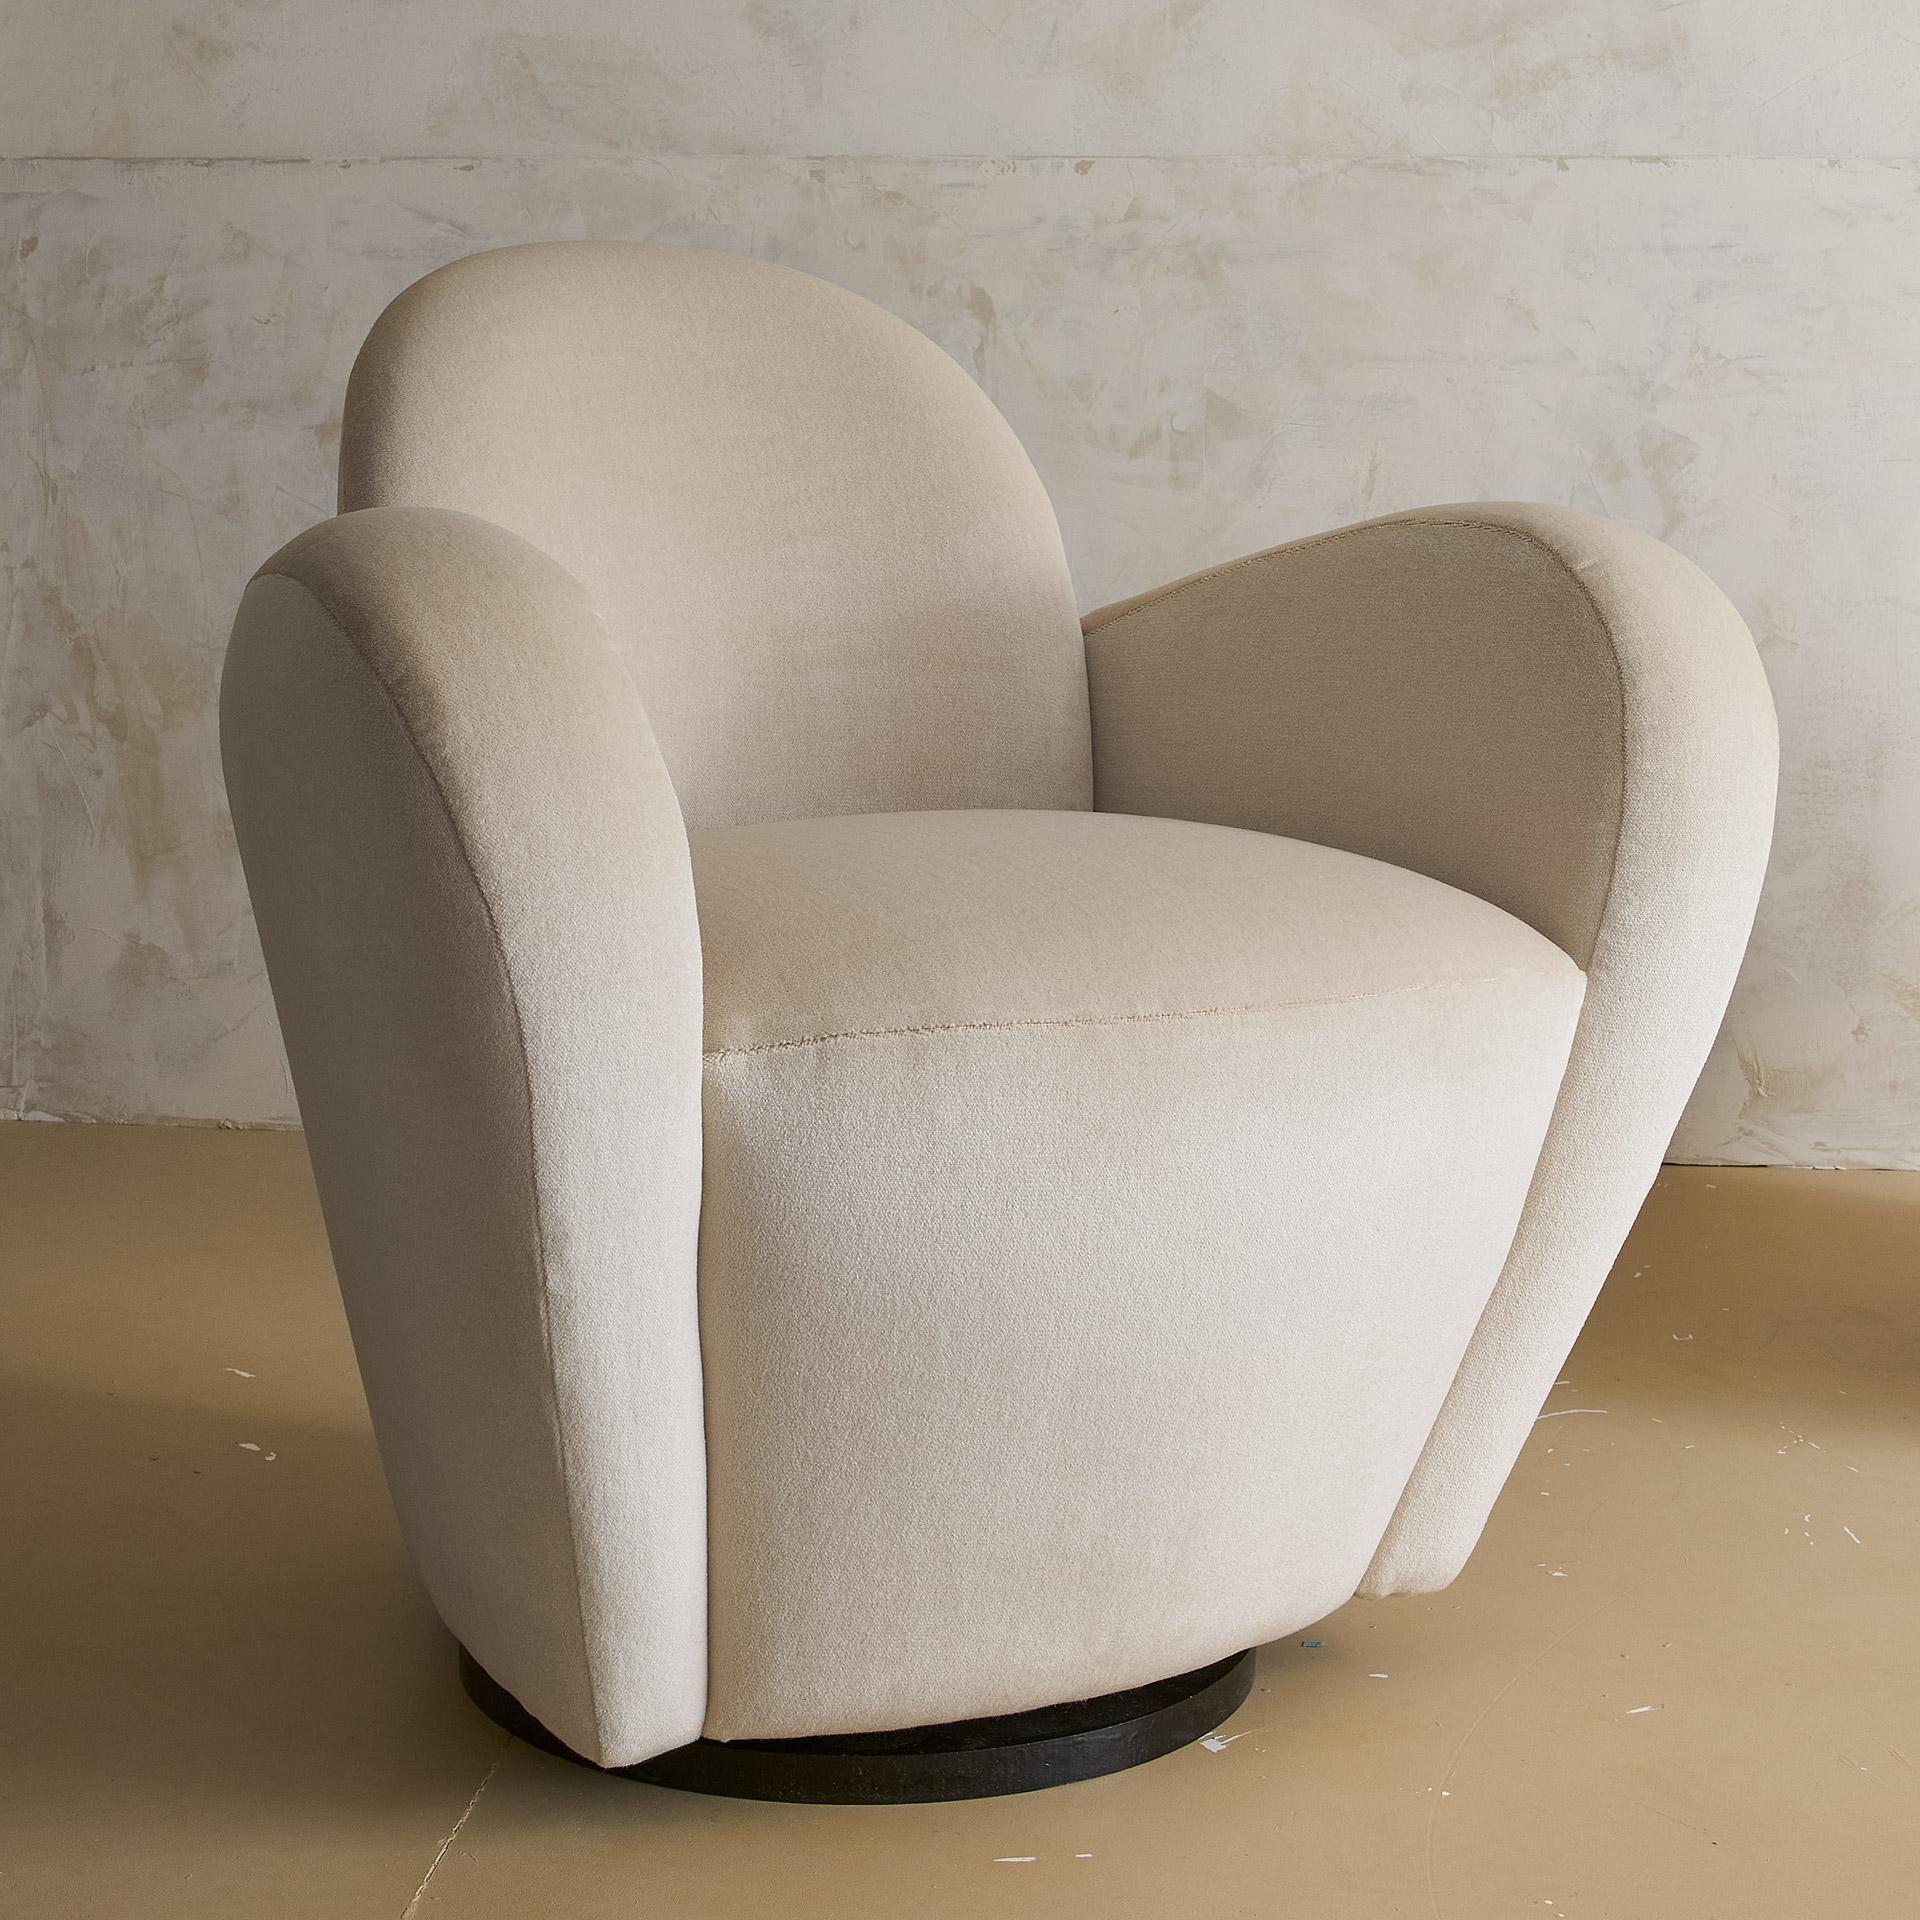 Wraparound Swivel Chair in the style of Vladimir Kagan in Ivory Mohair 6